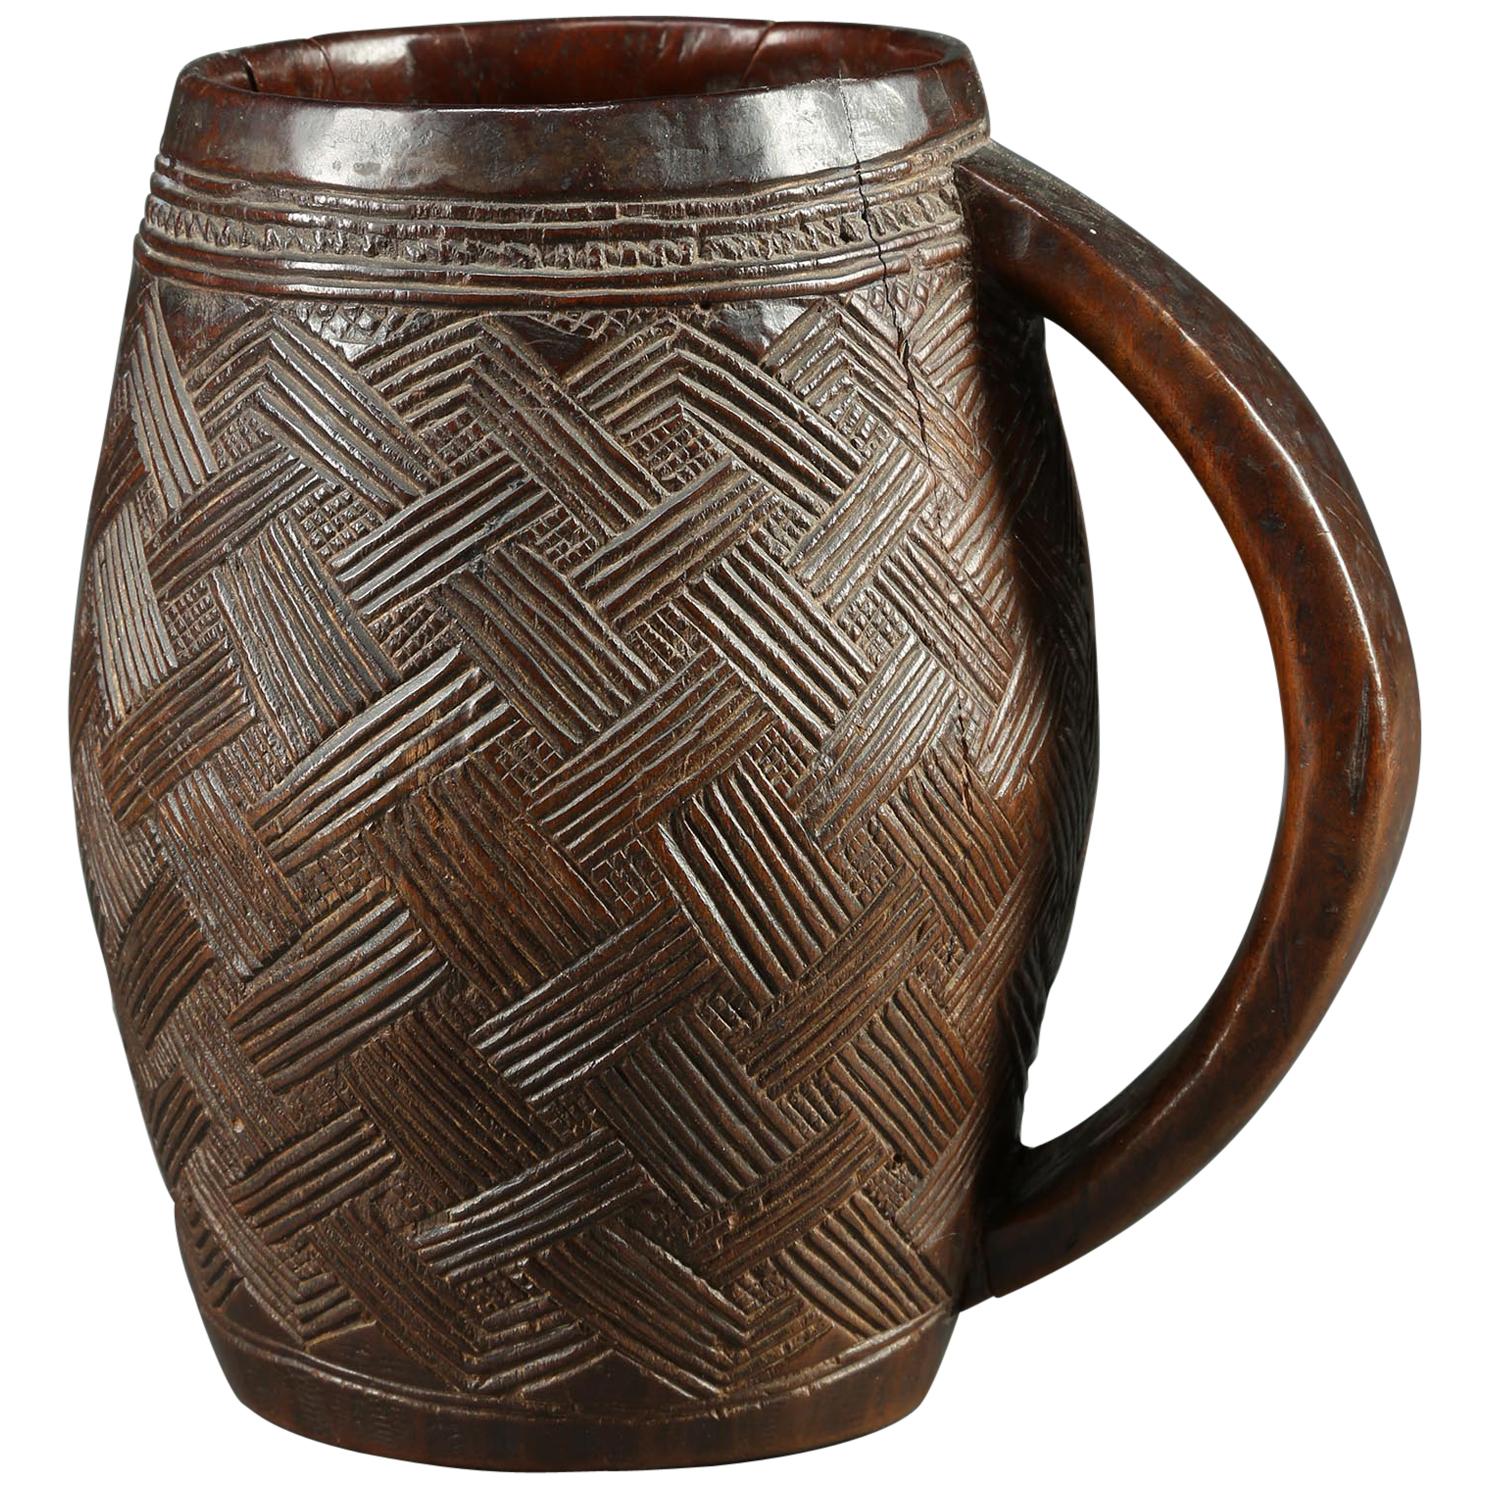 Kuba Tribal African Palm Wine Cup, Great Design, Early 20th Century